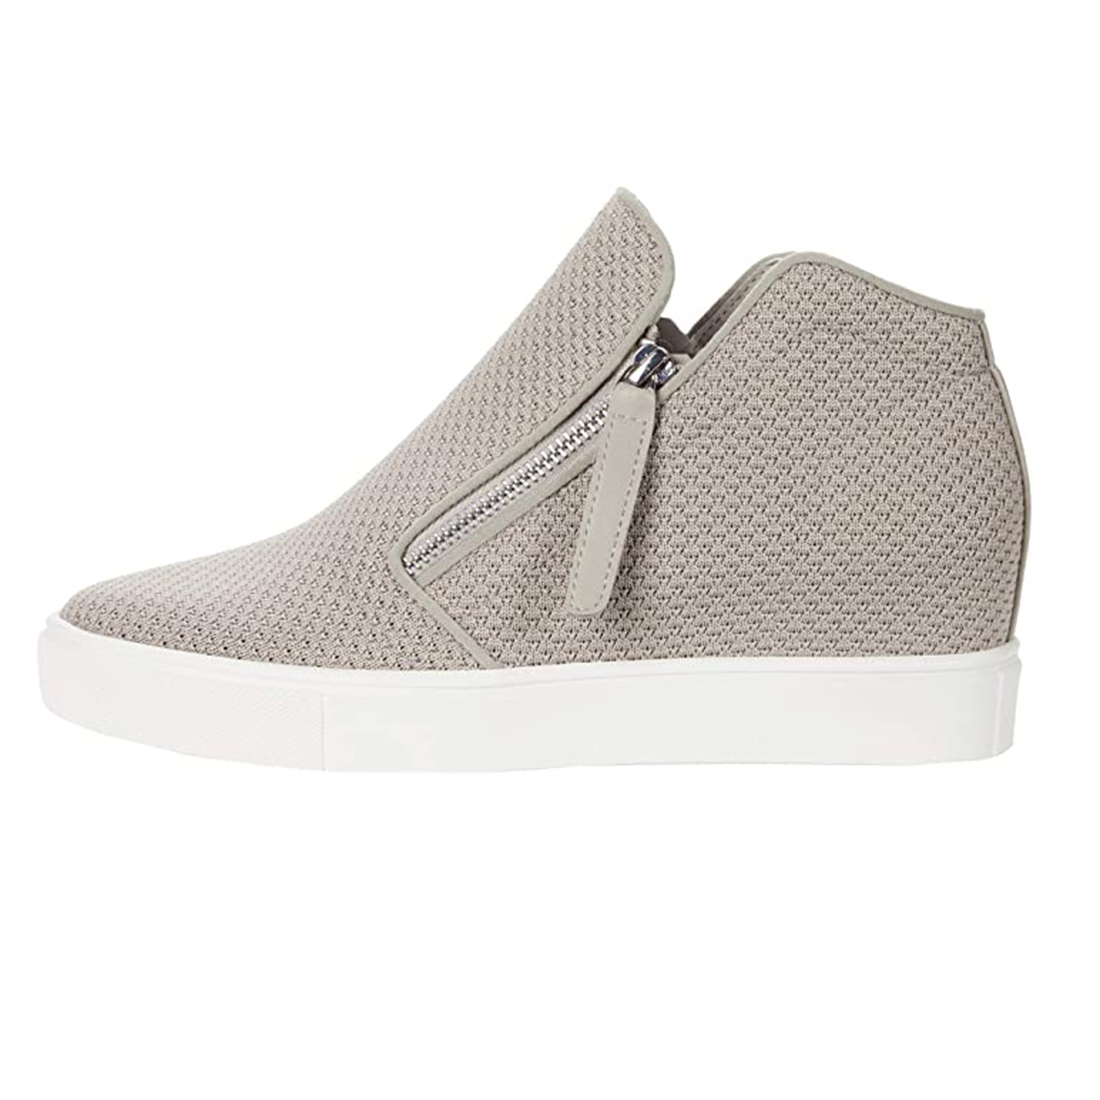 Steve Madden Click Sneaker in Taupe | Cotton Island Women's Clothing ...